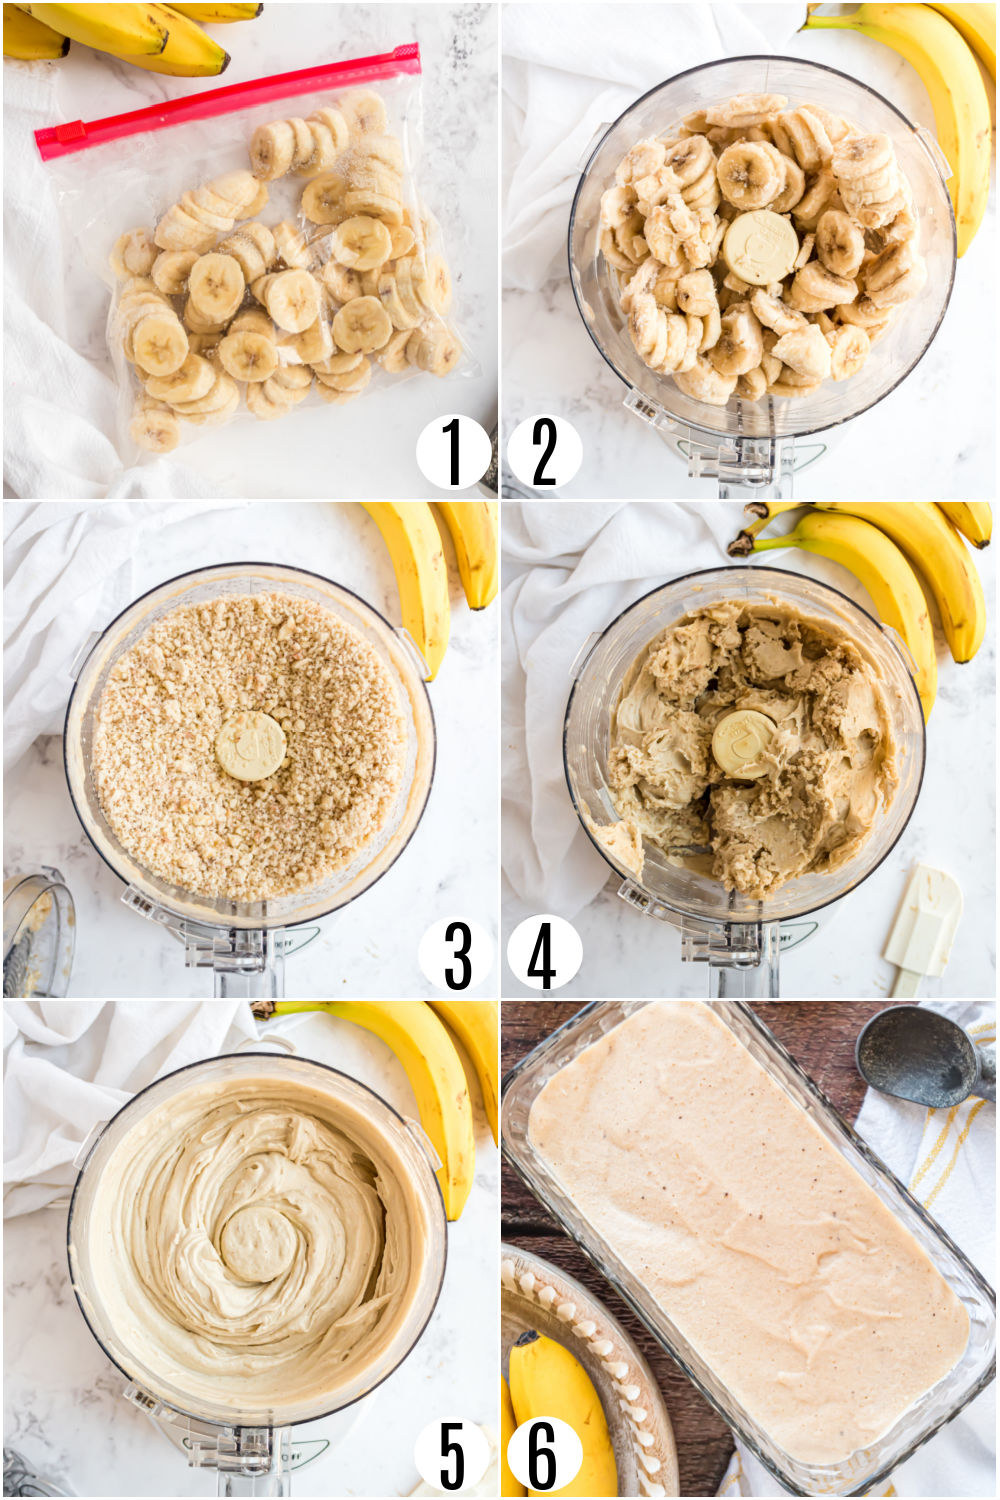 Step by step photos showing how to make banana ice cream. 